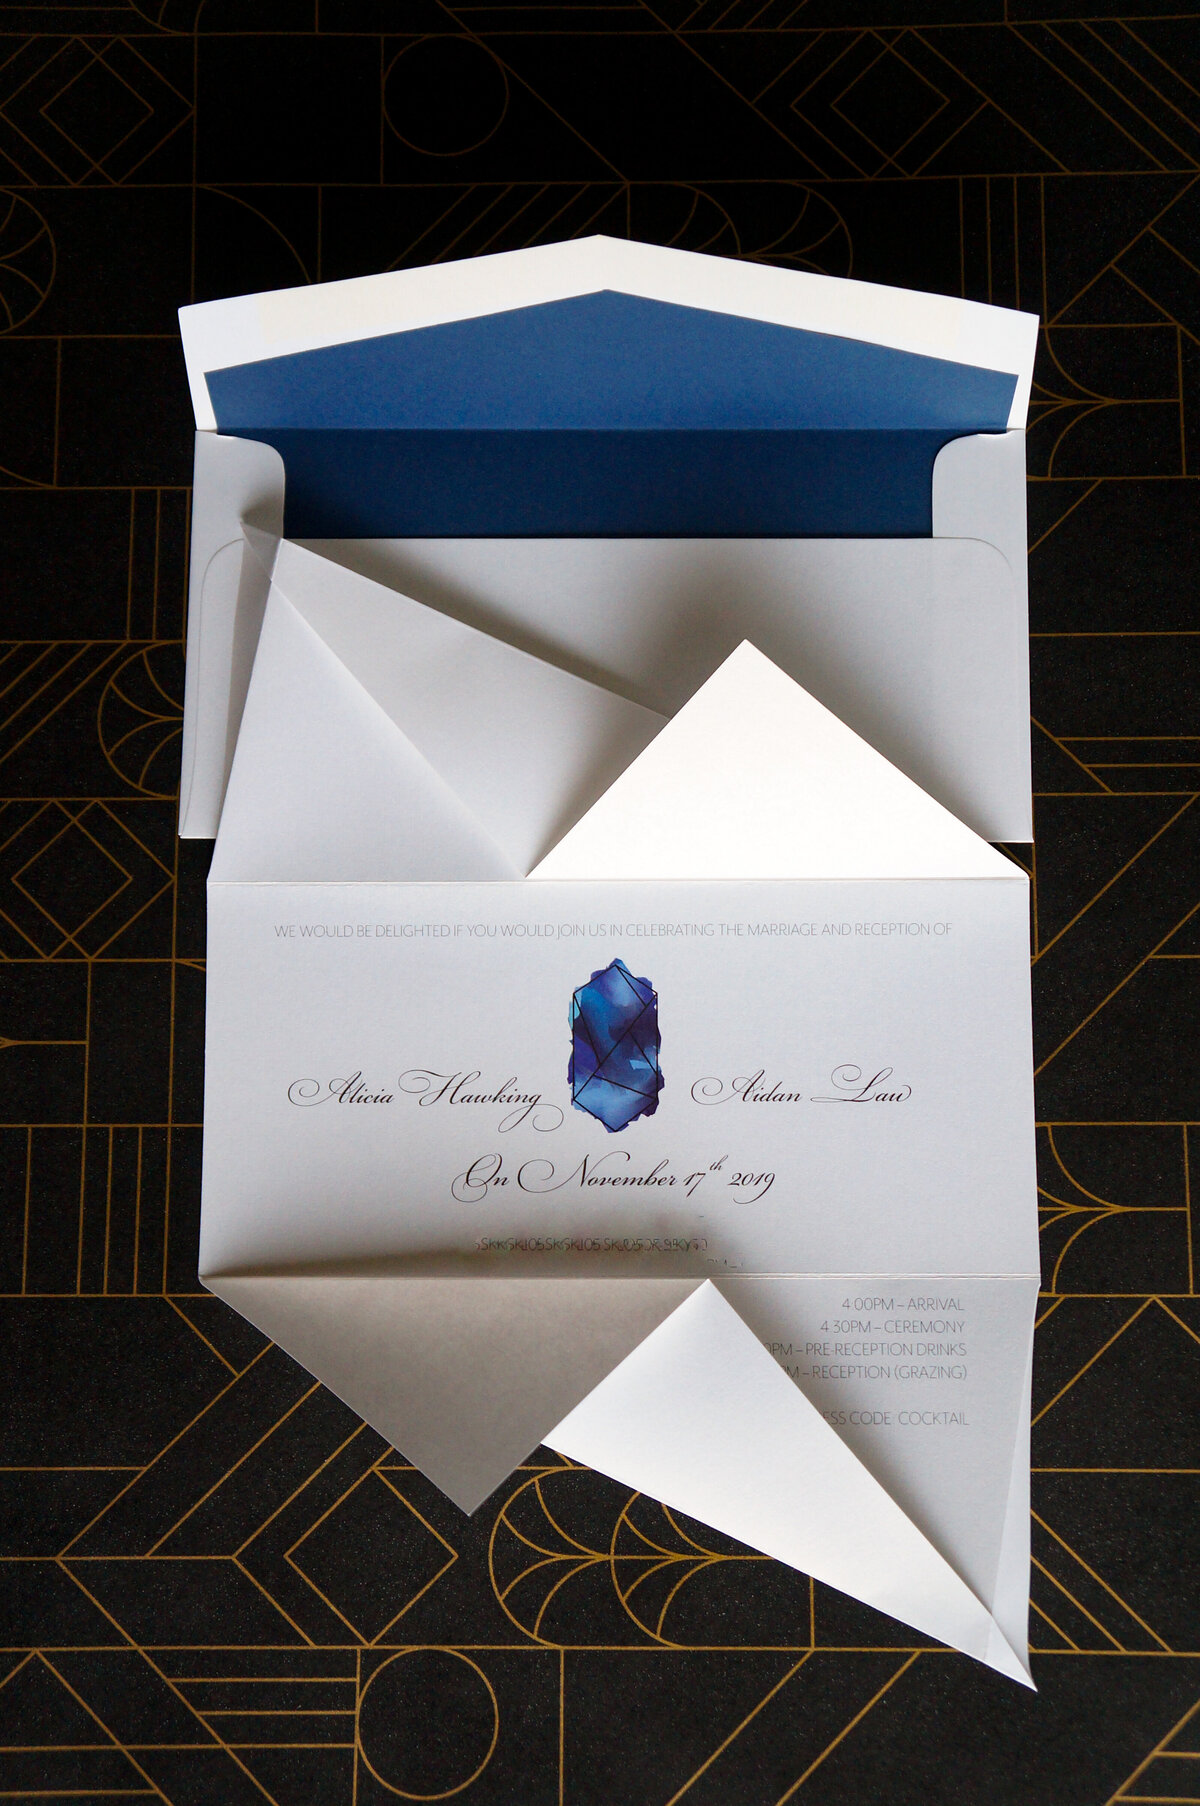 Unfolded origami wedding invitation with blue sapphire graphic and cursive script font